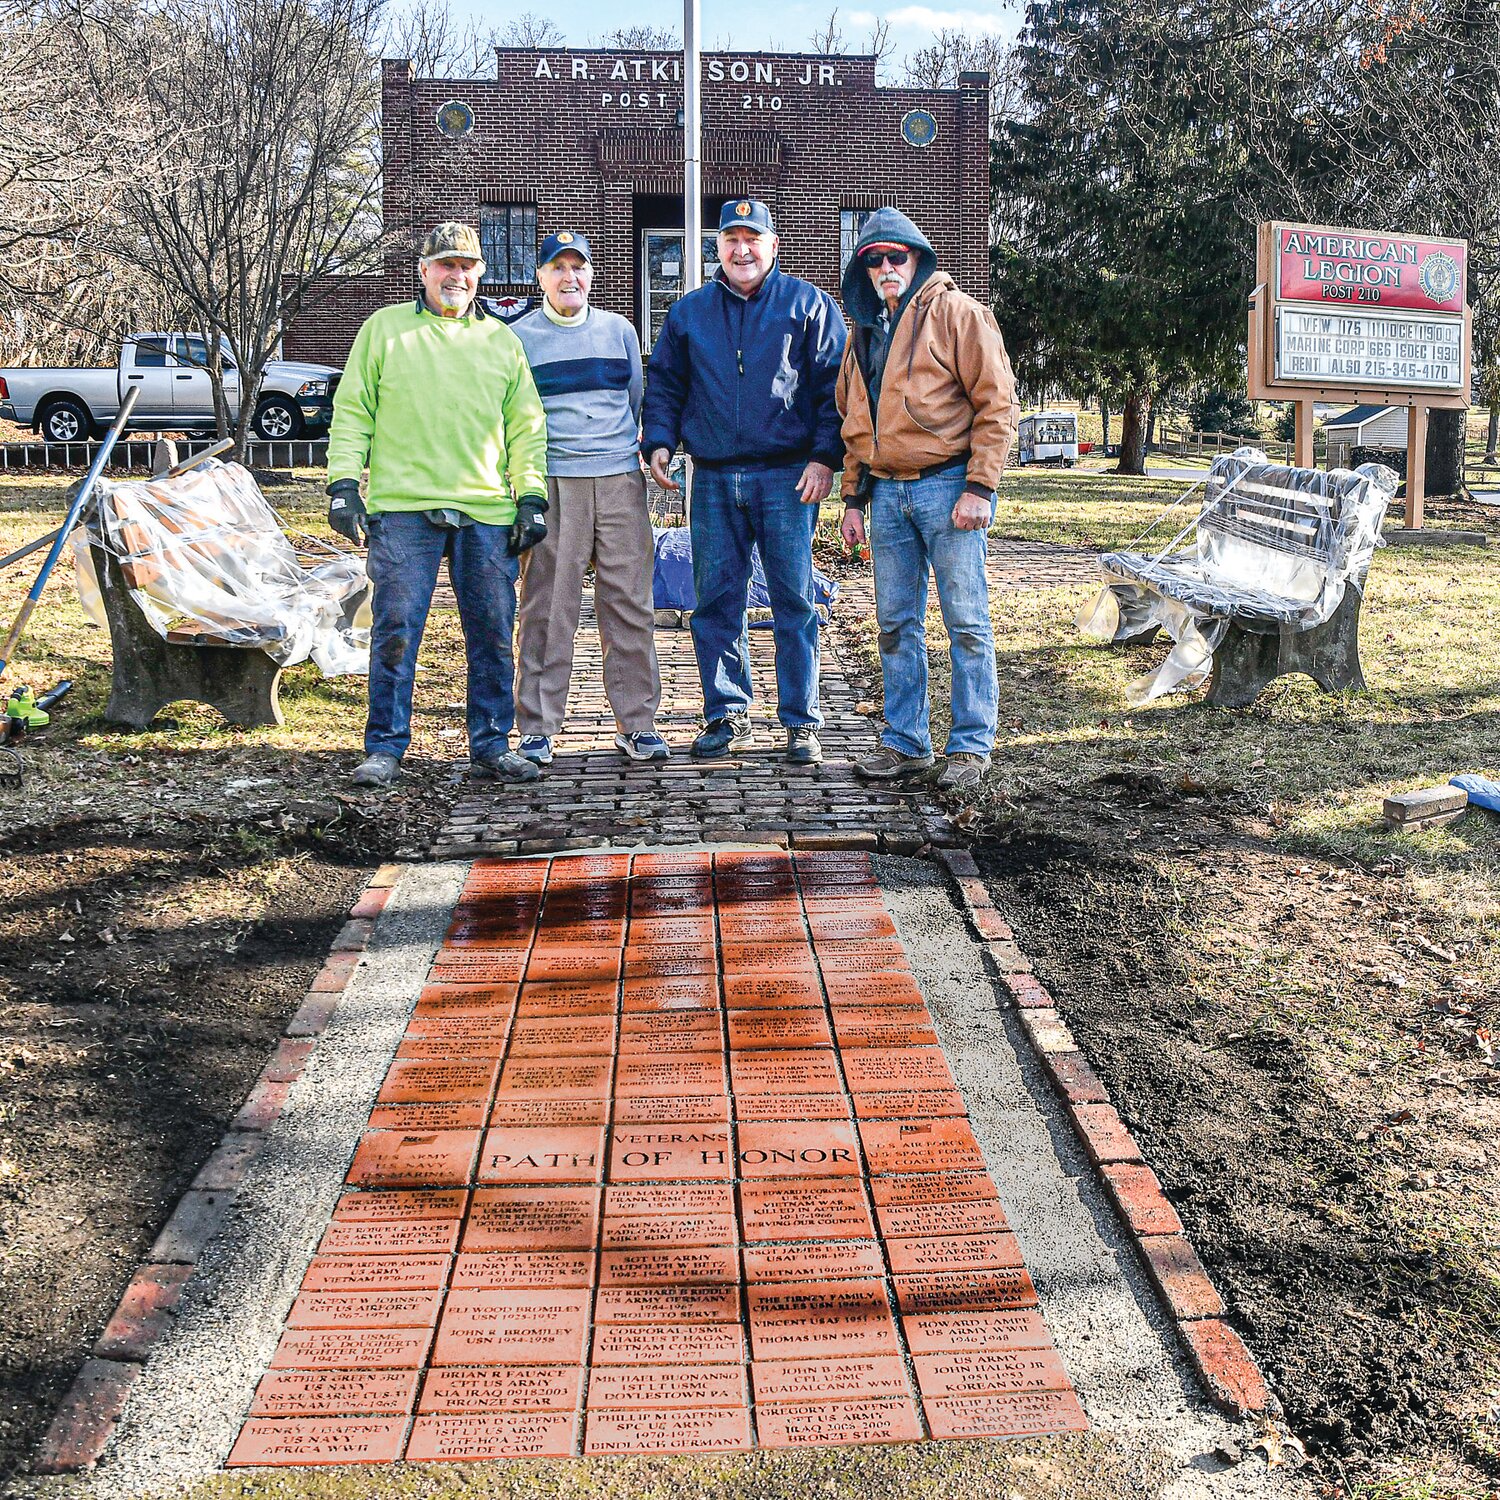 From left are Noel Pelletier, Tom Tirney, Tom Darringo and Bob Sundling, standing at the edge of the first section of the Path of Honor at Doylestown American Legion Post 210. The path honors and remembers past and present veterans and service members.